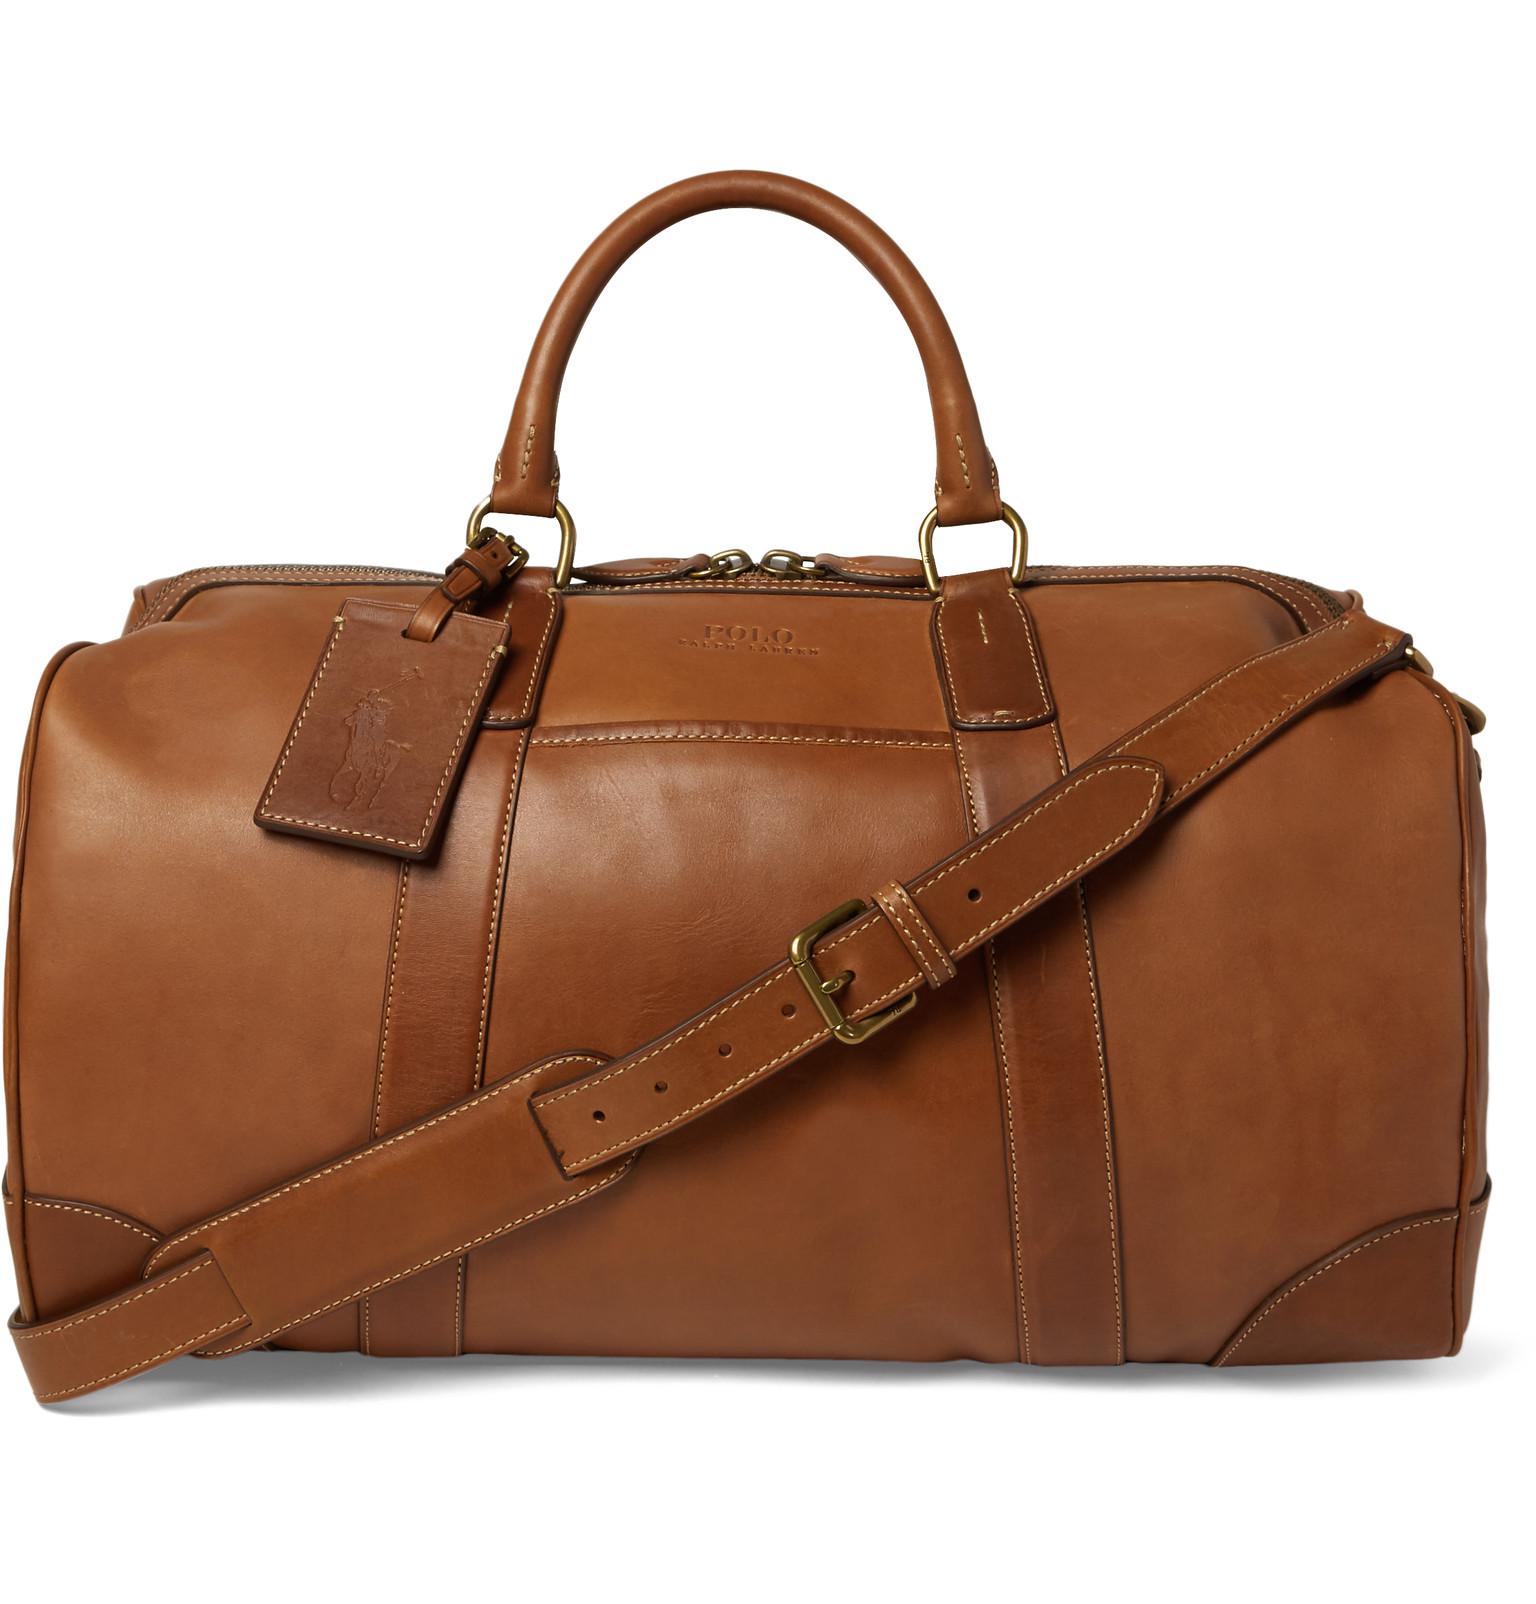 Polo Ralph Lauren Leather Duffle Bag in Light Brown (Brown) for Men - Lyst